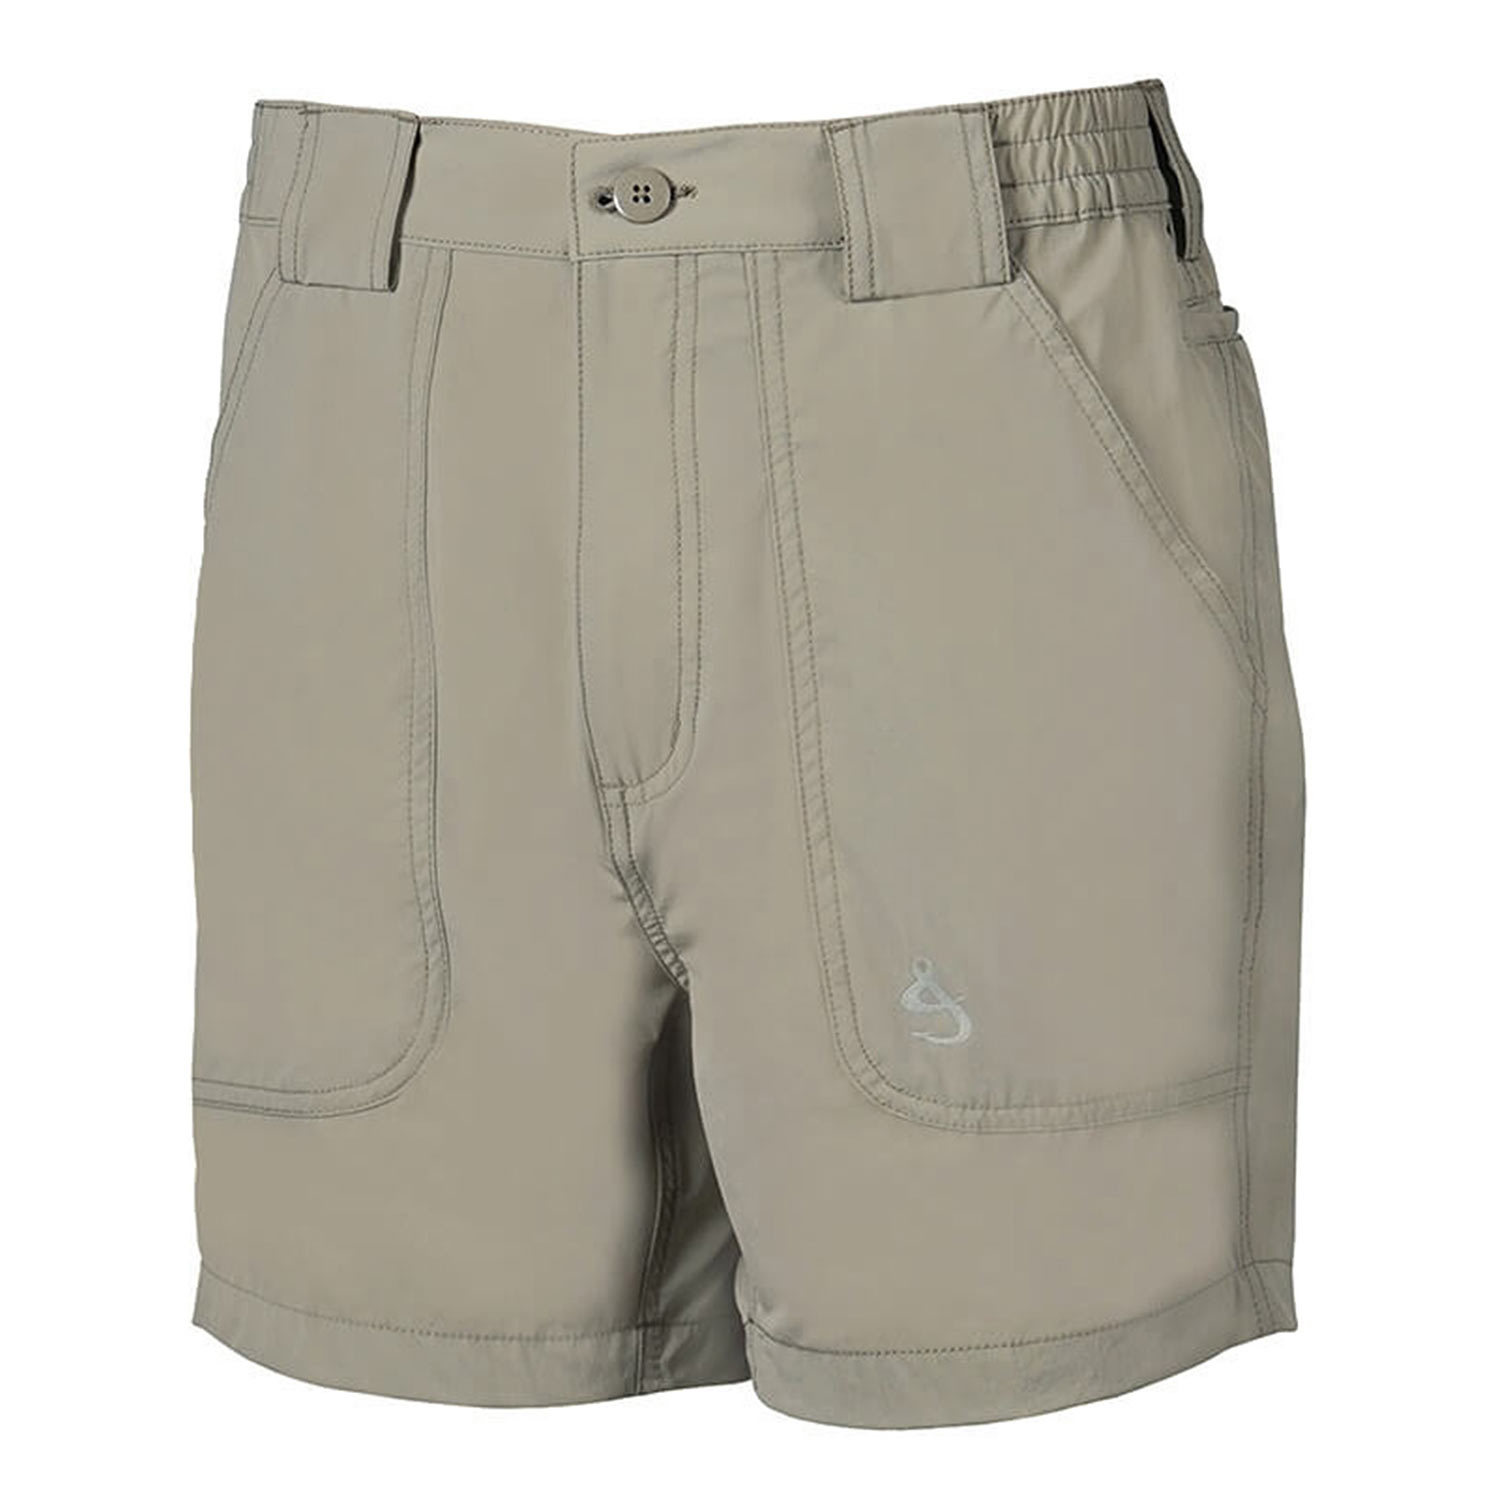 Hook & Tackle Men's Beer Can Island 4-Way Stretch Short - 32 - Khaki